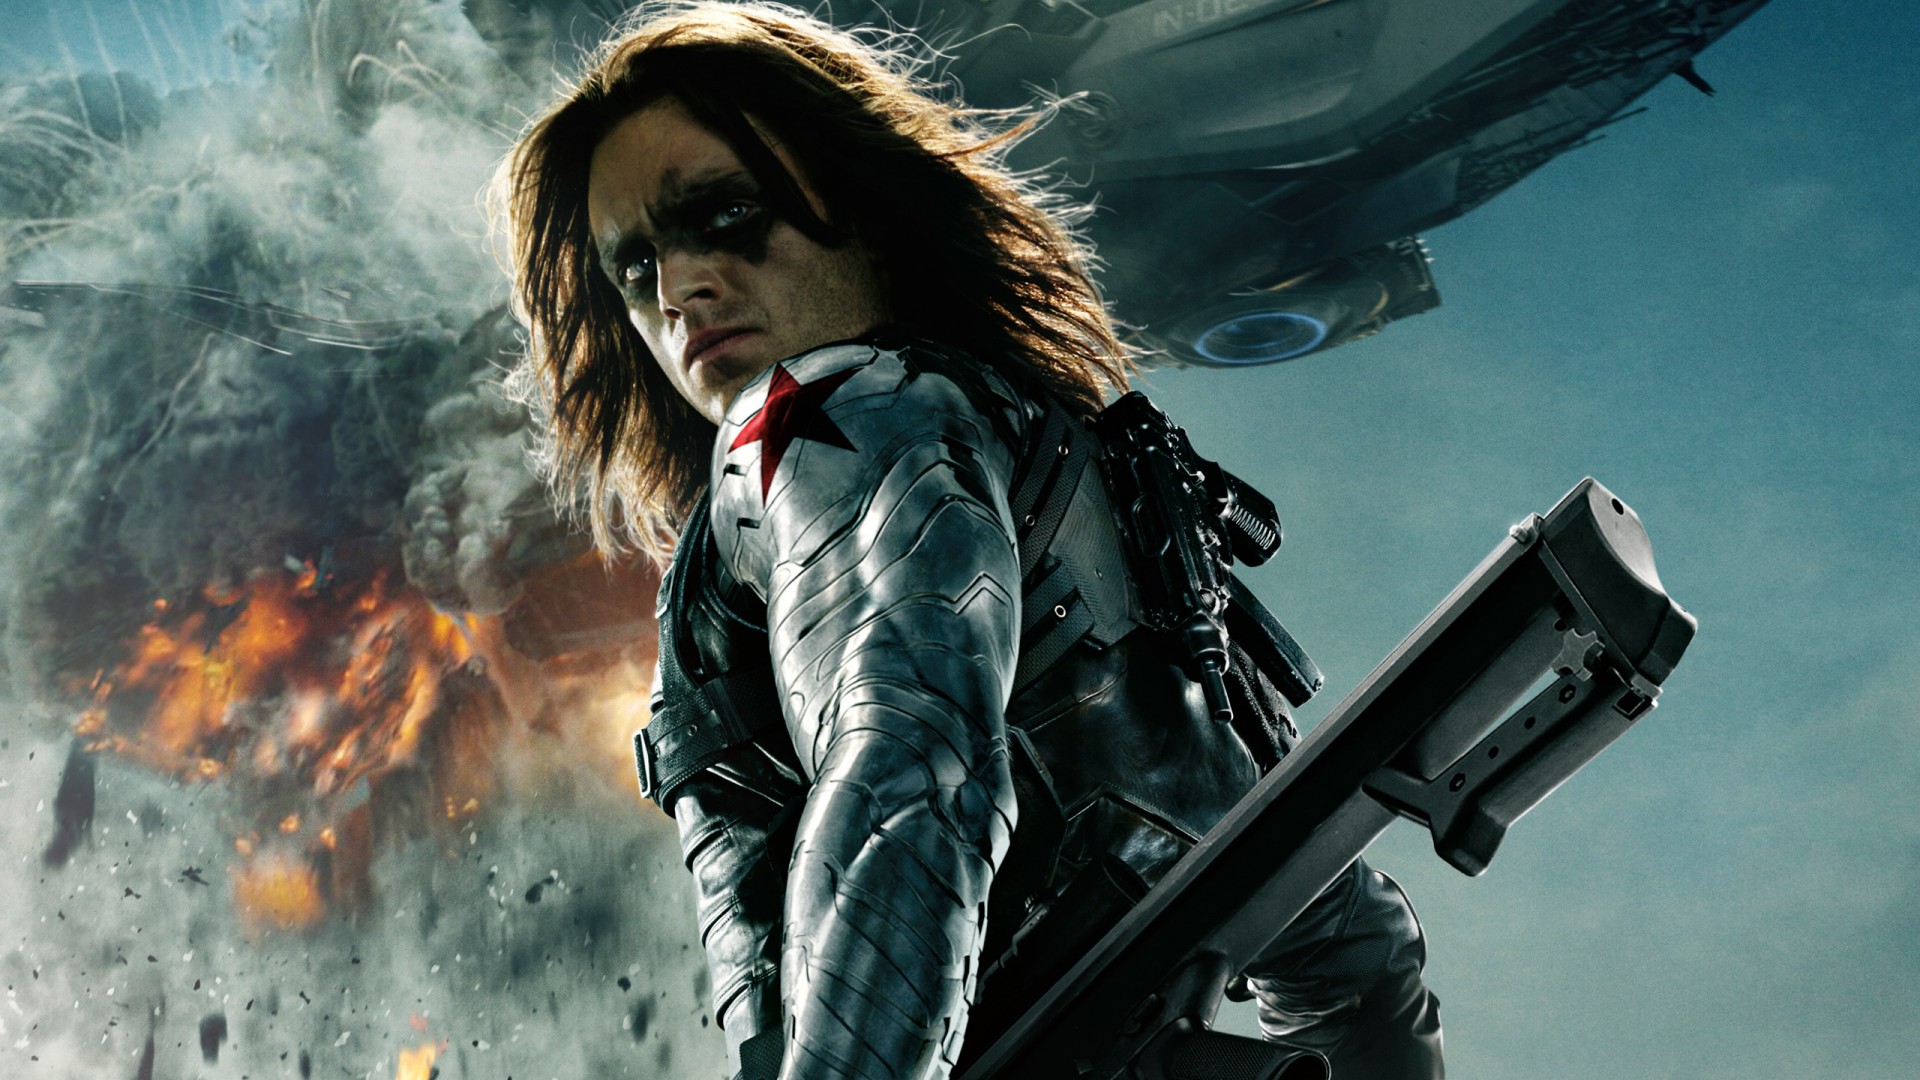 winter soldier wallpaper,action adventure game,cg artwork,movie,games,fictional character